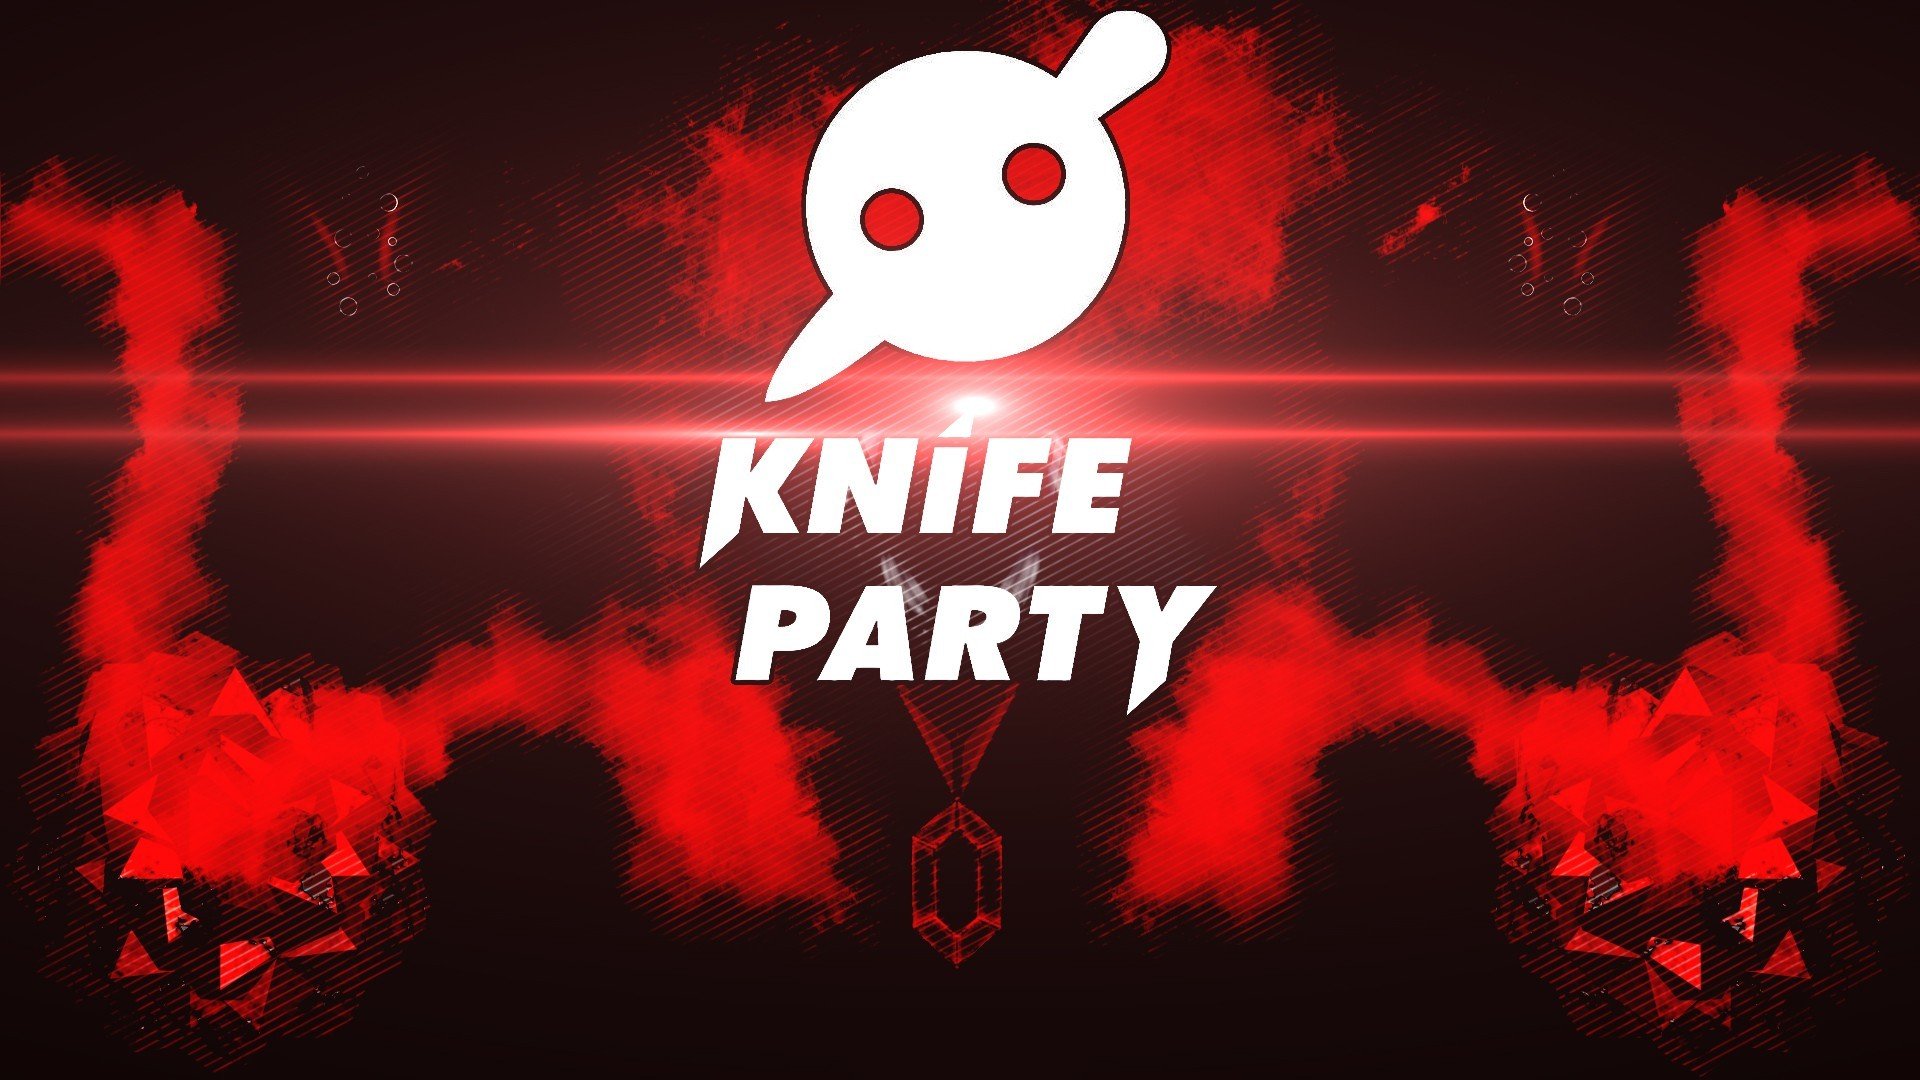 Knife Party Widescreen Wallpapers 